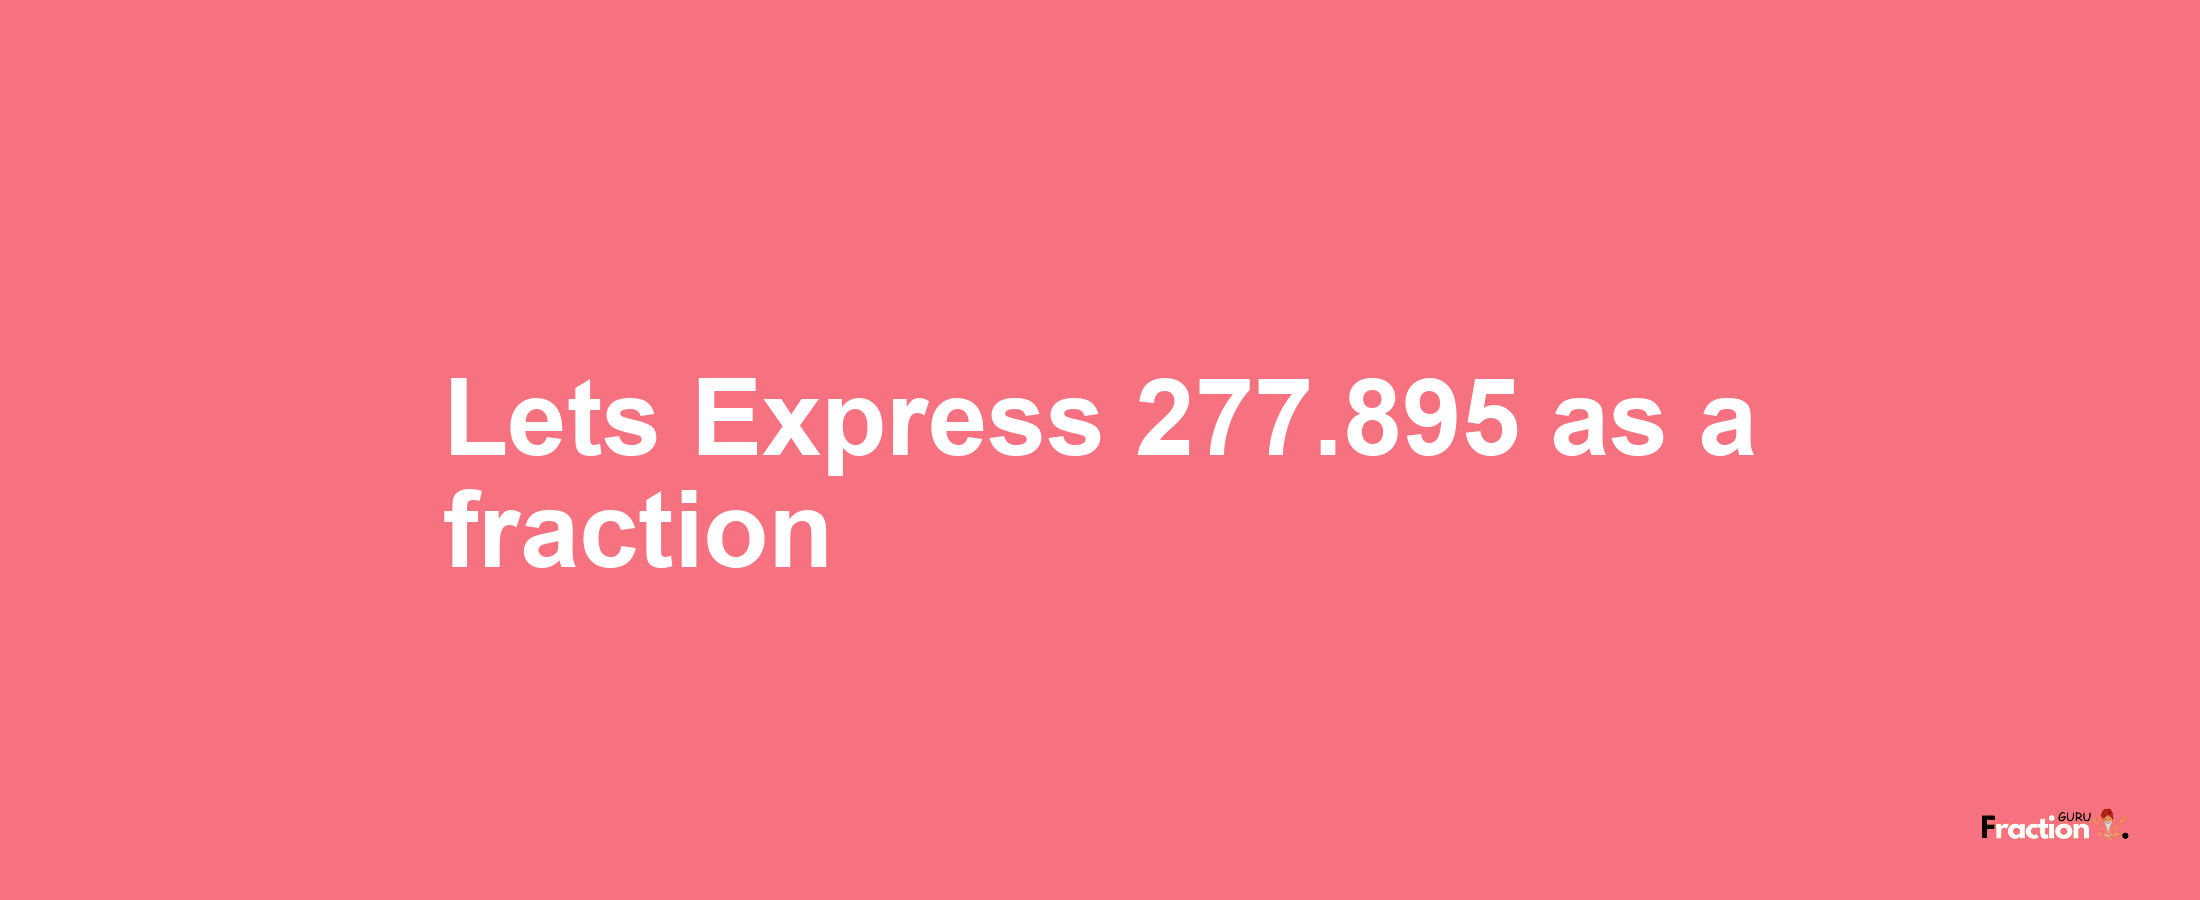 Lets Express 277.895 as afraction